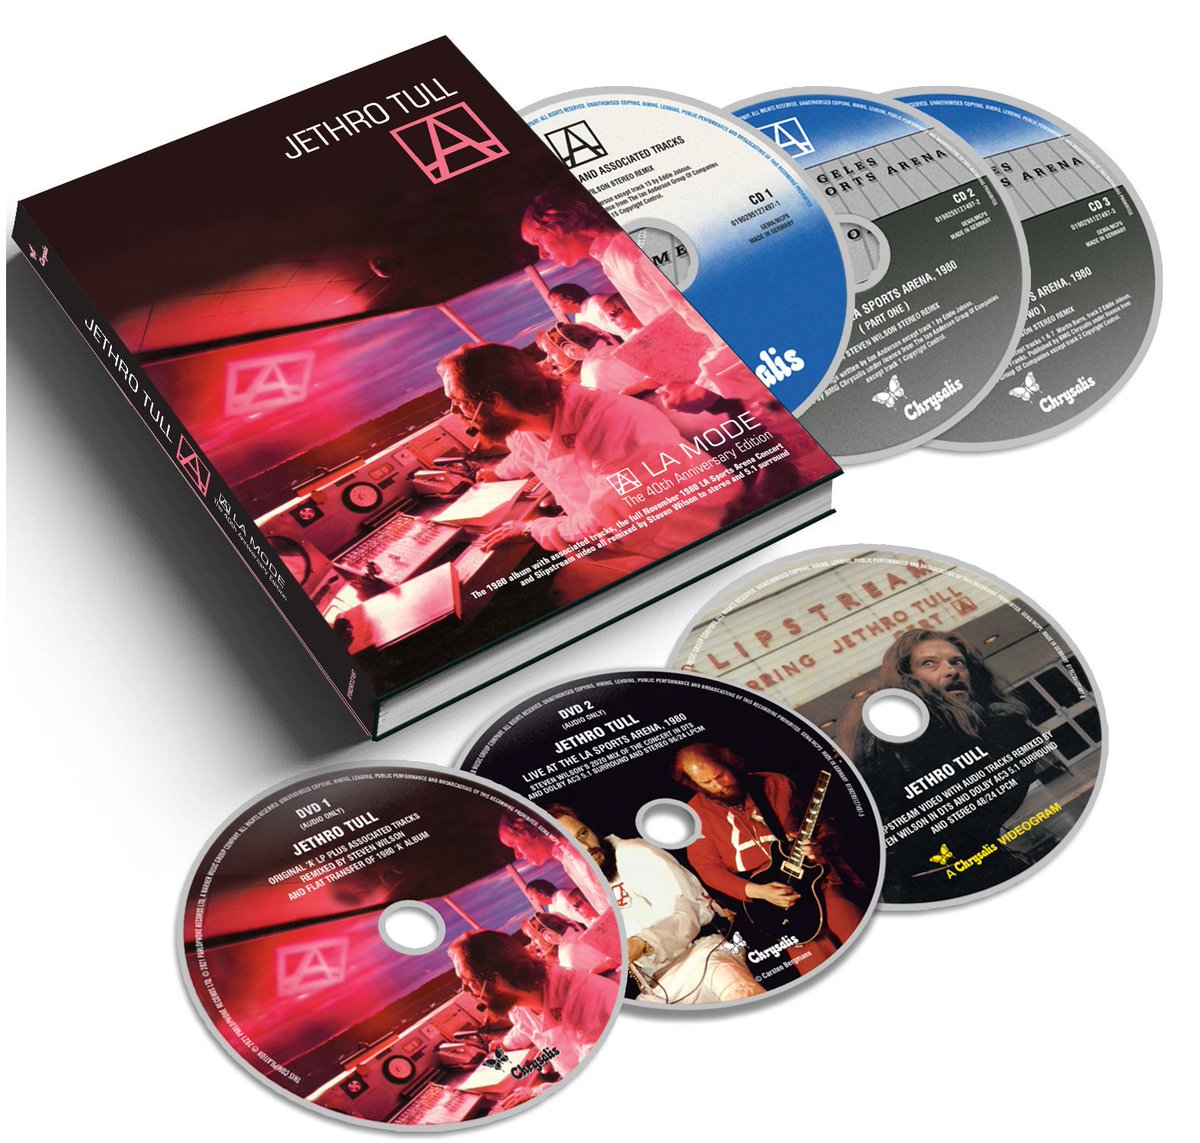 To mark 40 years since its release, a new 40th anniversary edition of the album: ‘A’ will be released as a 3CD/DVD set, out April 16th. Featuring new Steven Wilson remixes, unreleased studio and live recordings from 1980. Available to pre-order now 👉 lnk.to/JethroTull-A40…